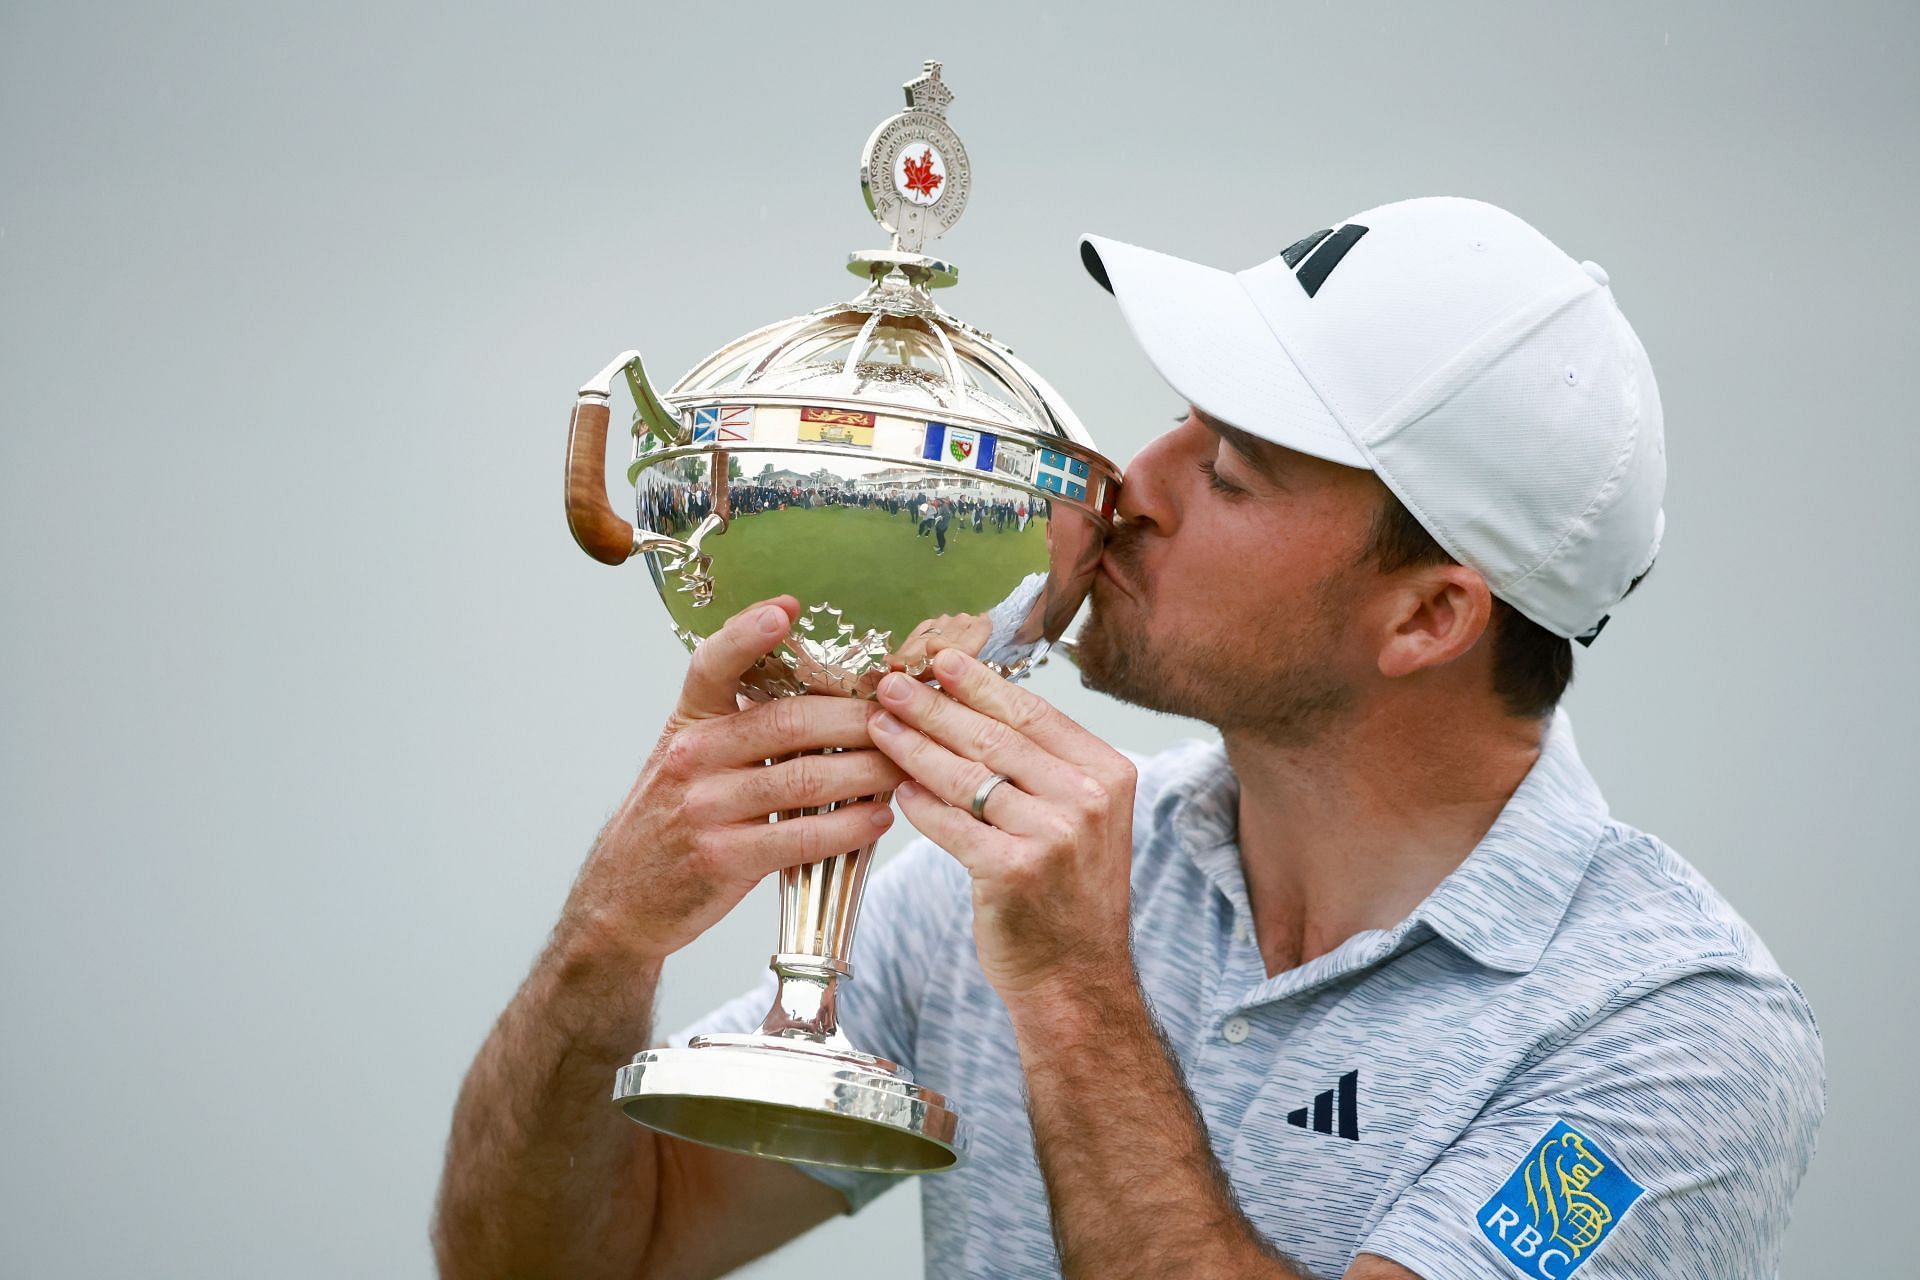 Abbotsford's Nick Taylor snakes 72-foot eagle putt to win RBC Canadian Open  - The Abbotsford News